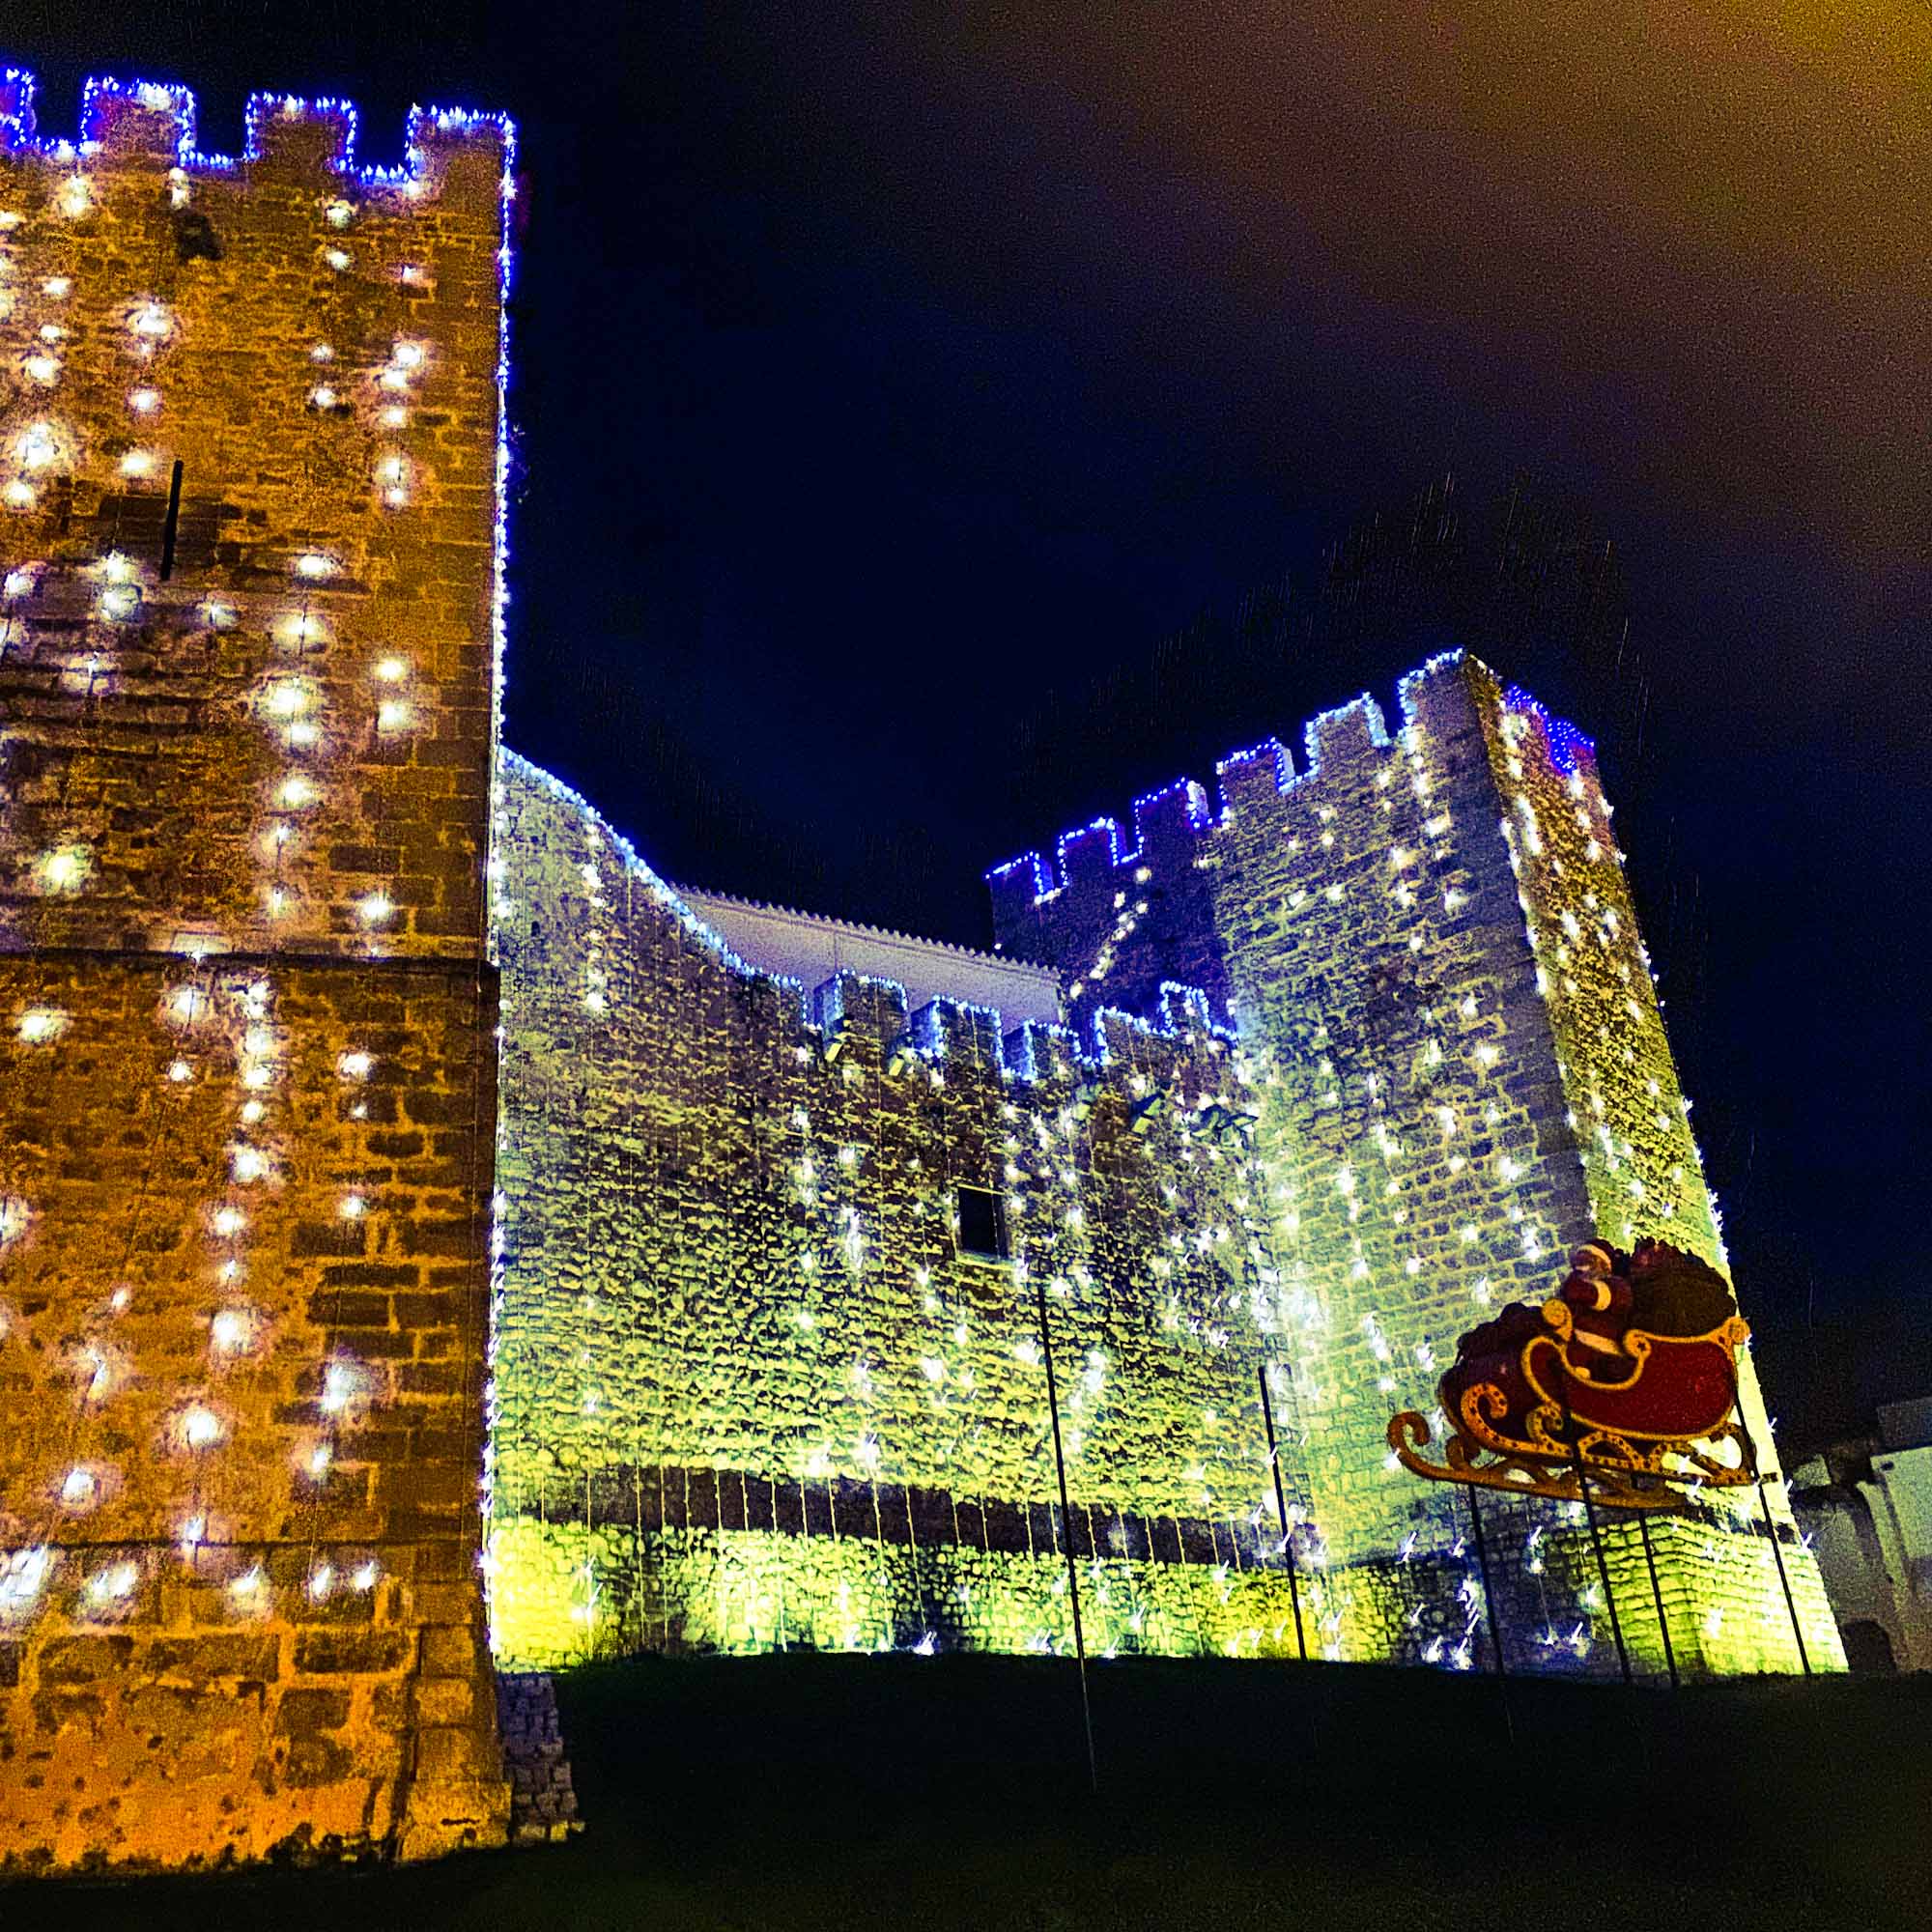 High stone outer wall of Loule Castle, Portugal, illuminated with Christmas string lights